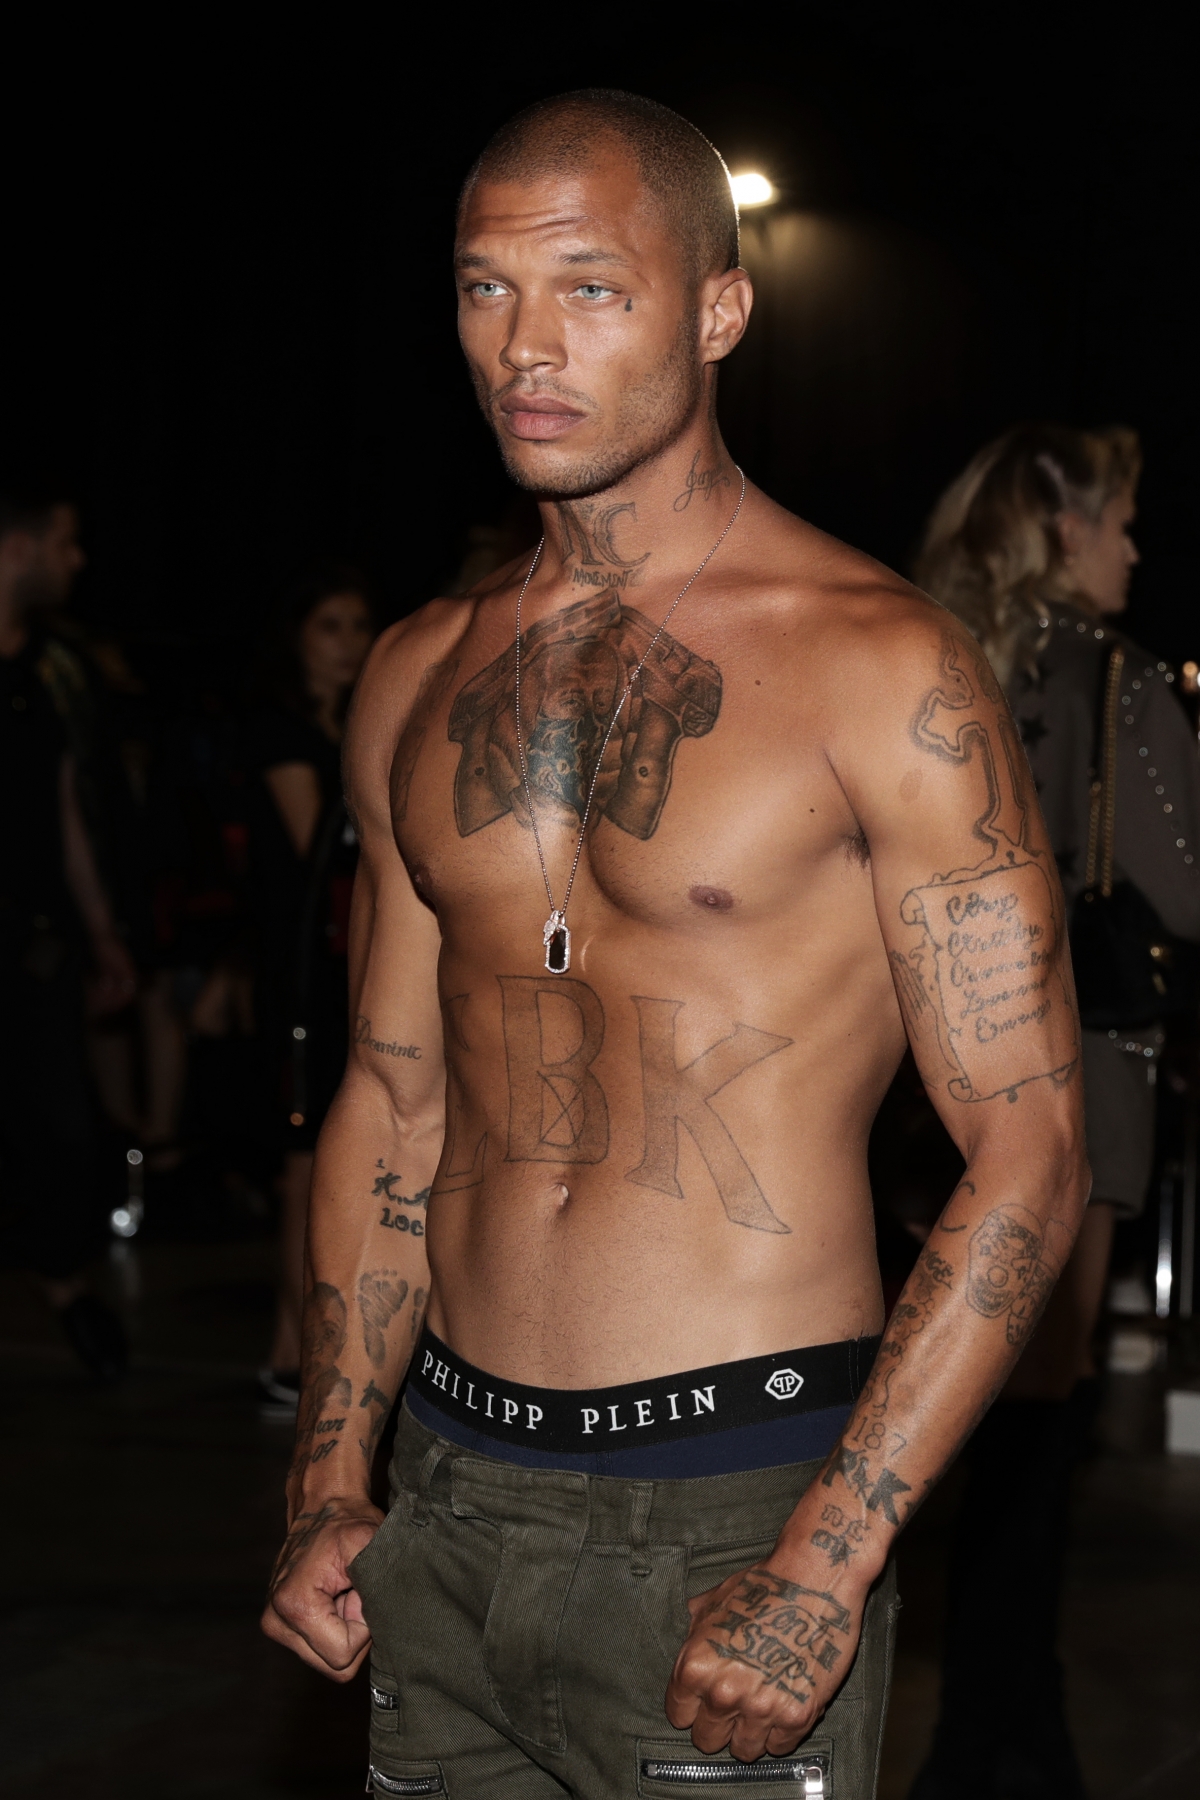 Jeremy Meeks claims he's in love with Chloe Green, but experts don't